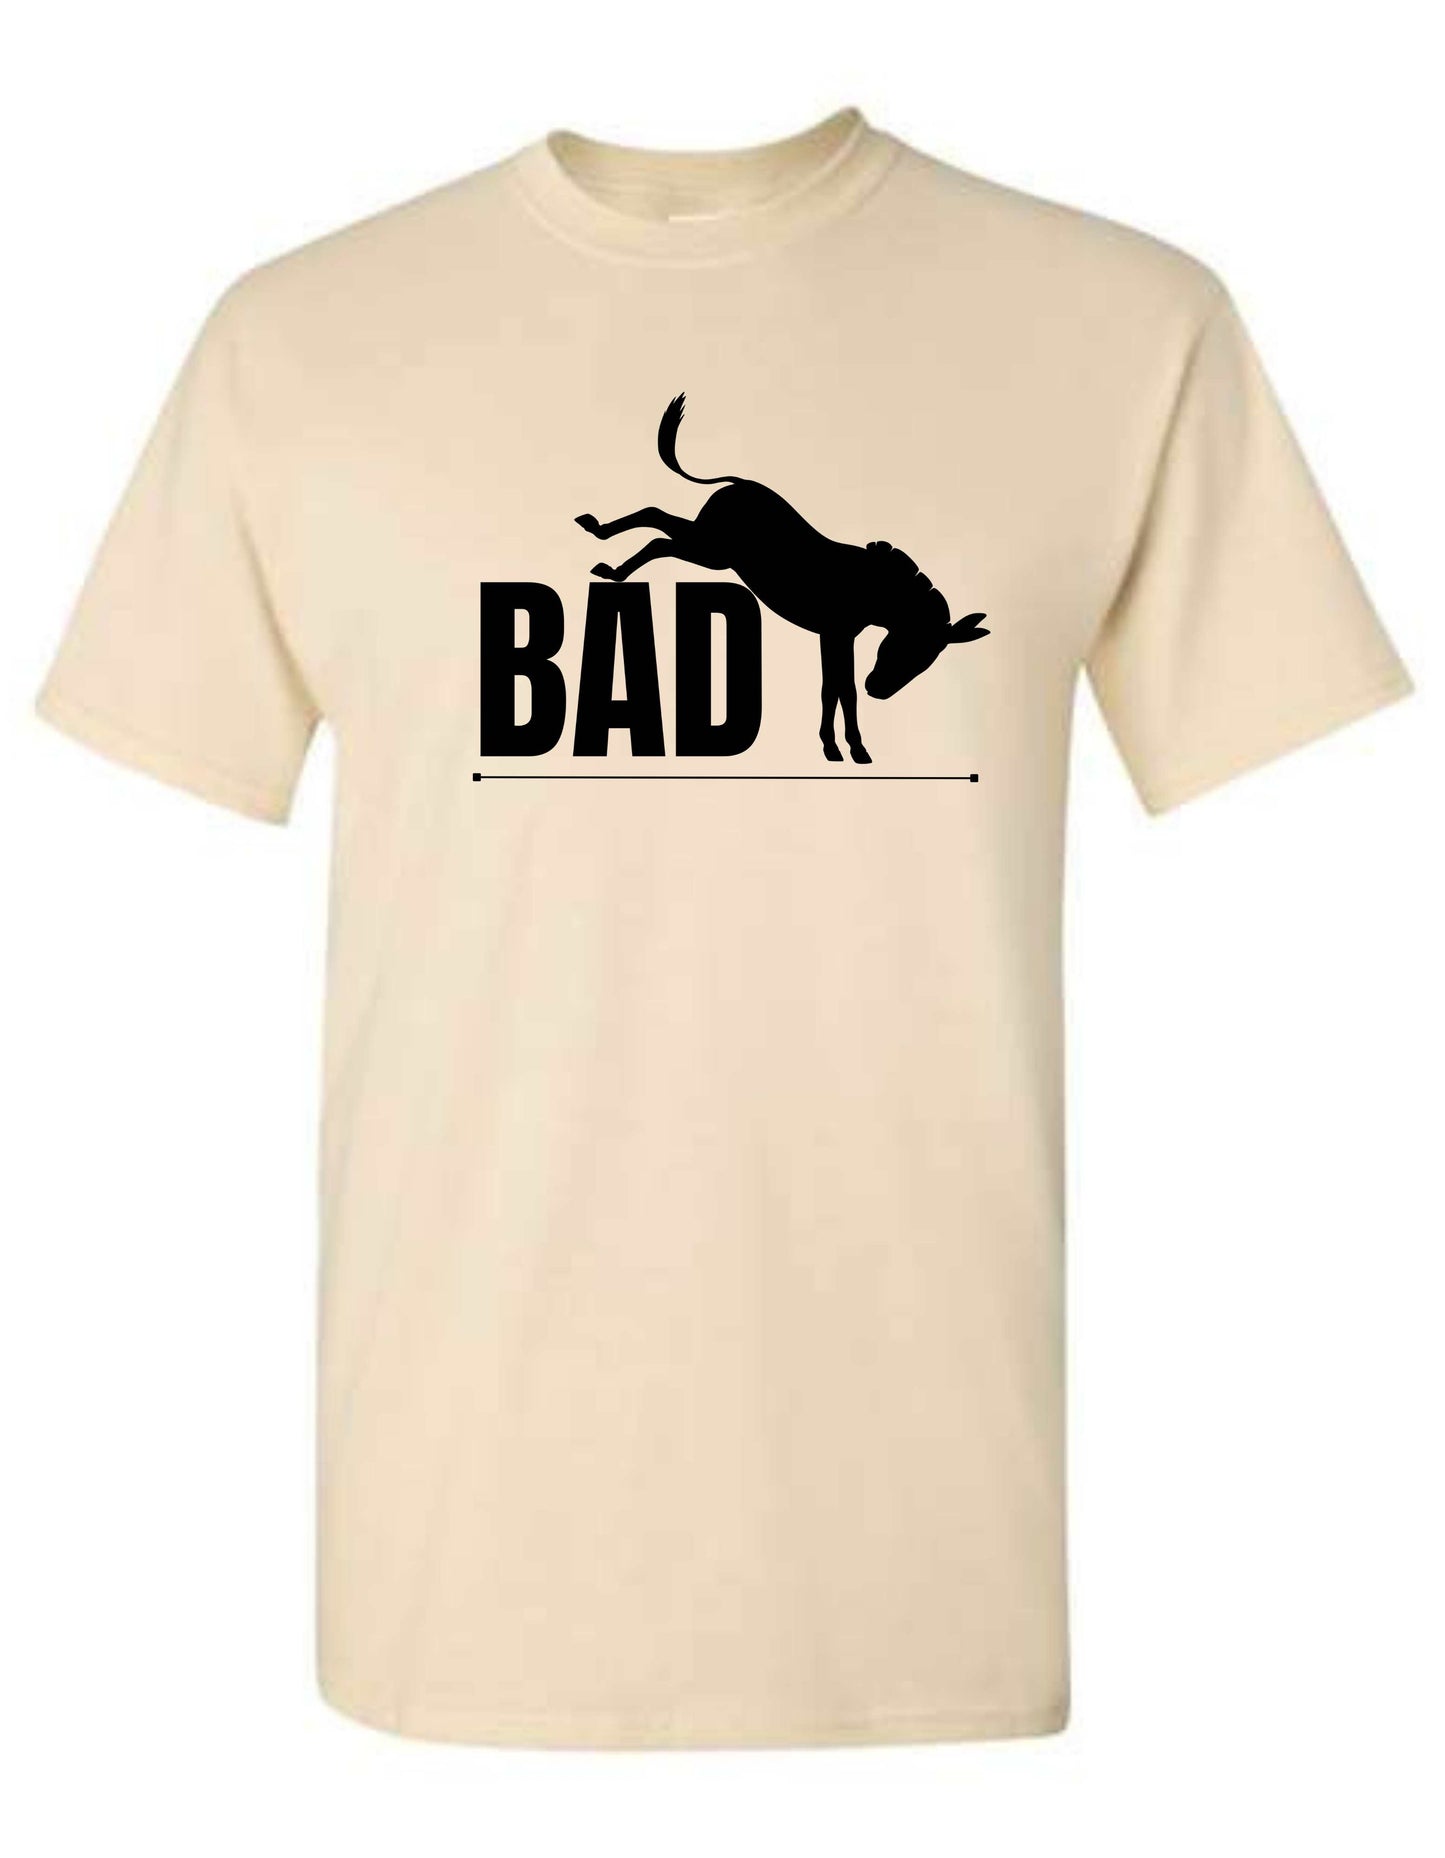 Bad A$$ - Graphic T-Shirt - Mister Snarky's